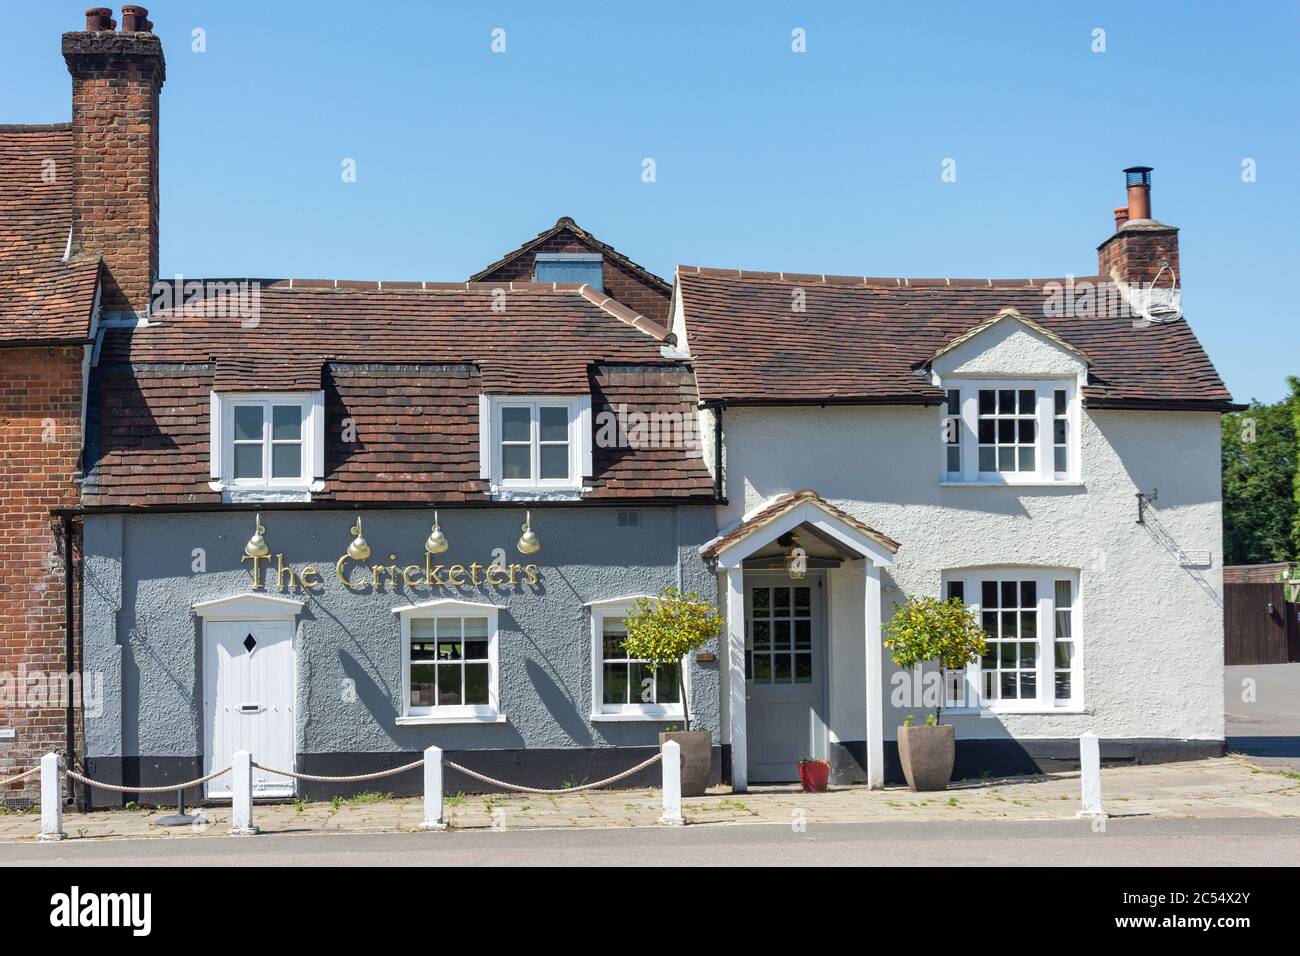 The Cricketers Pub, The Green, Sarratt, Hertfordshire, Angleterre, Royaume-Uni Banque D'Images